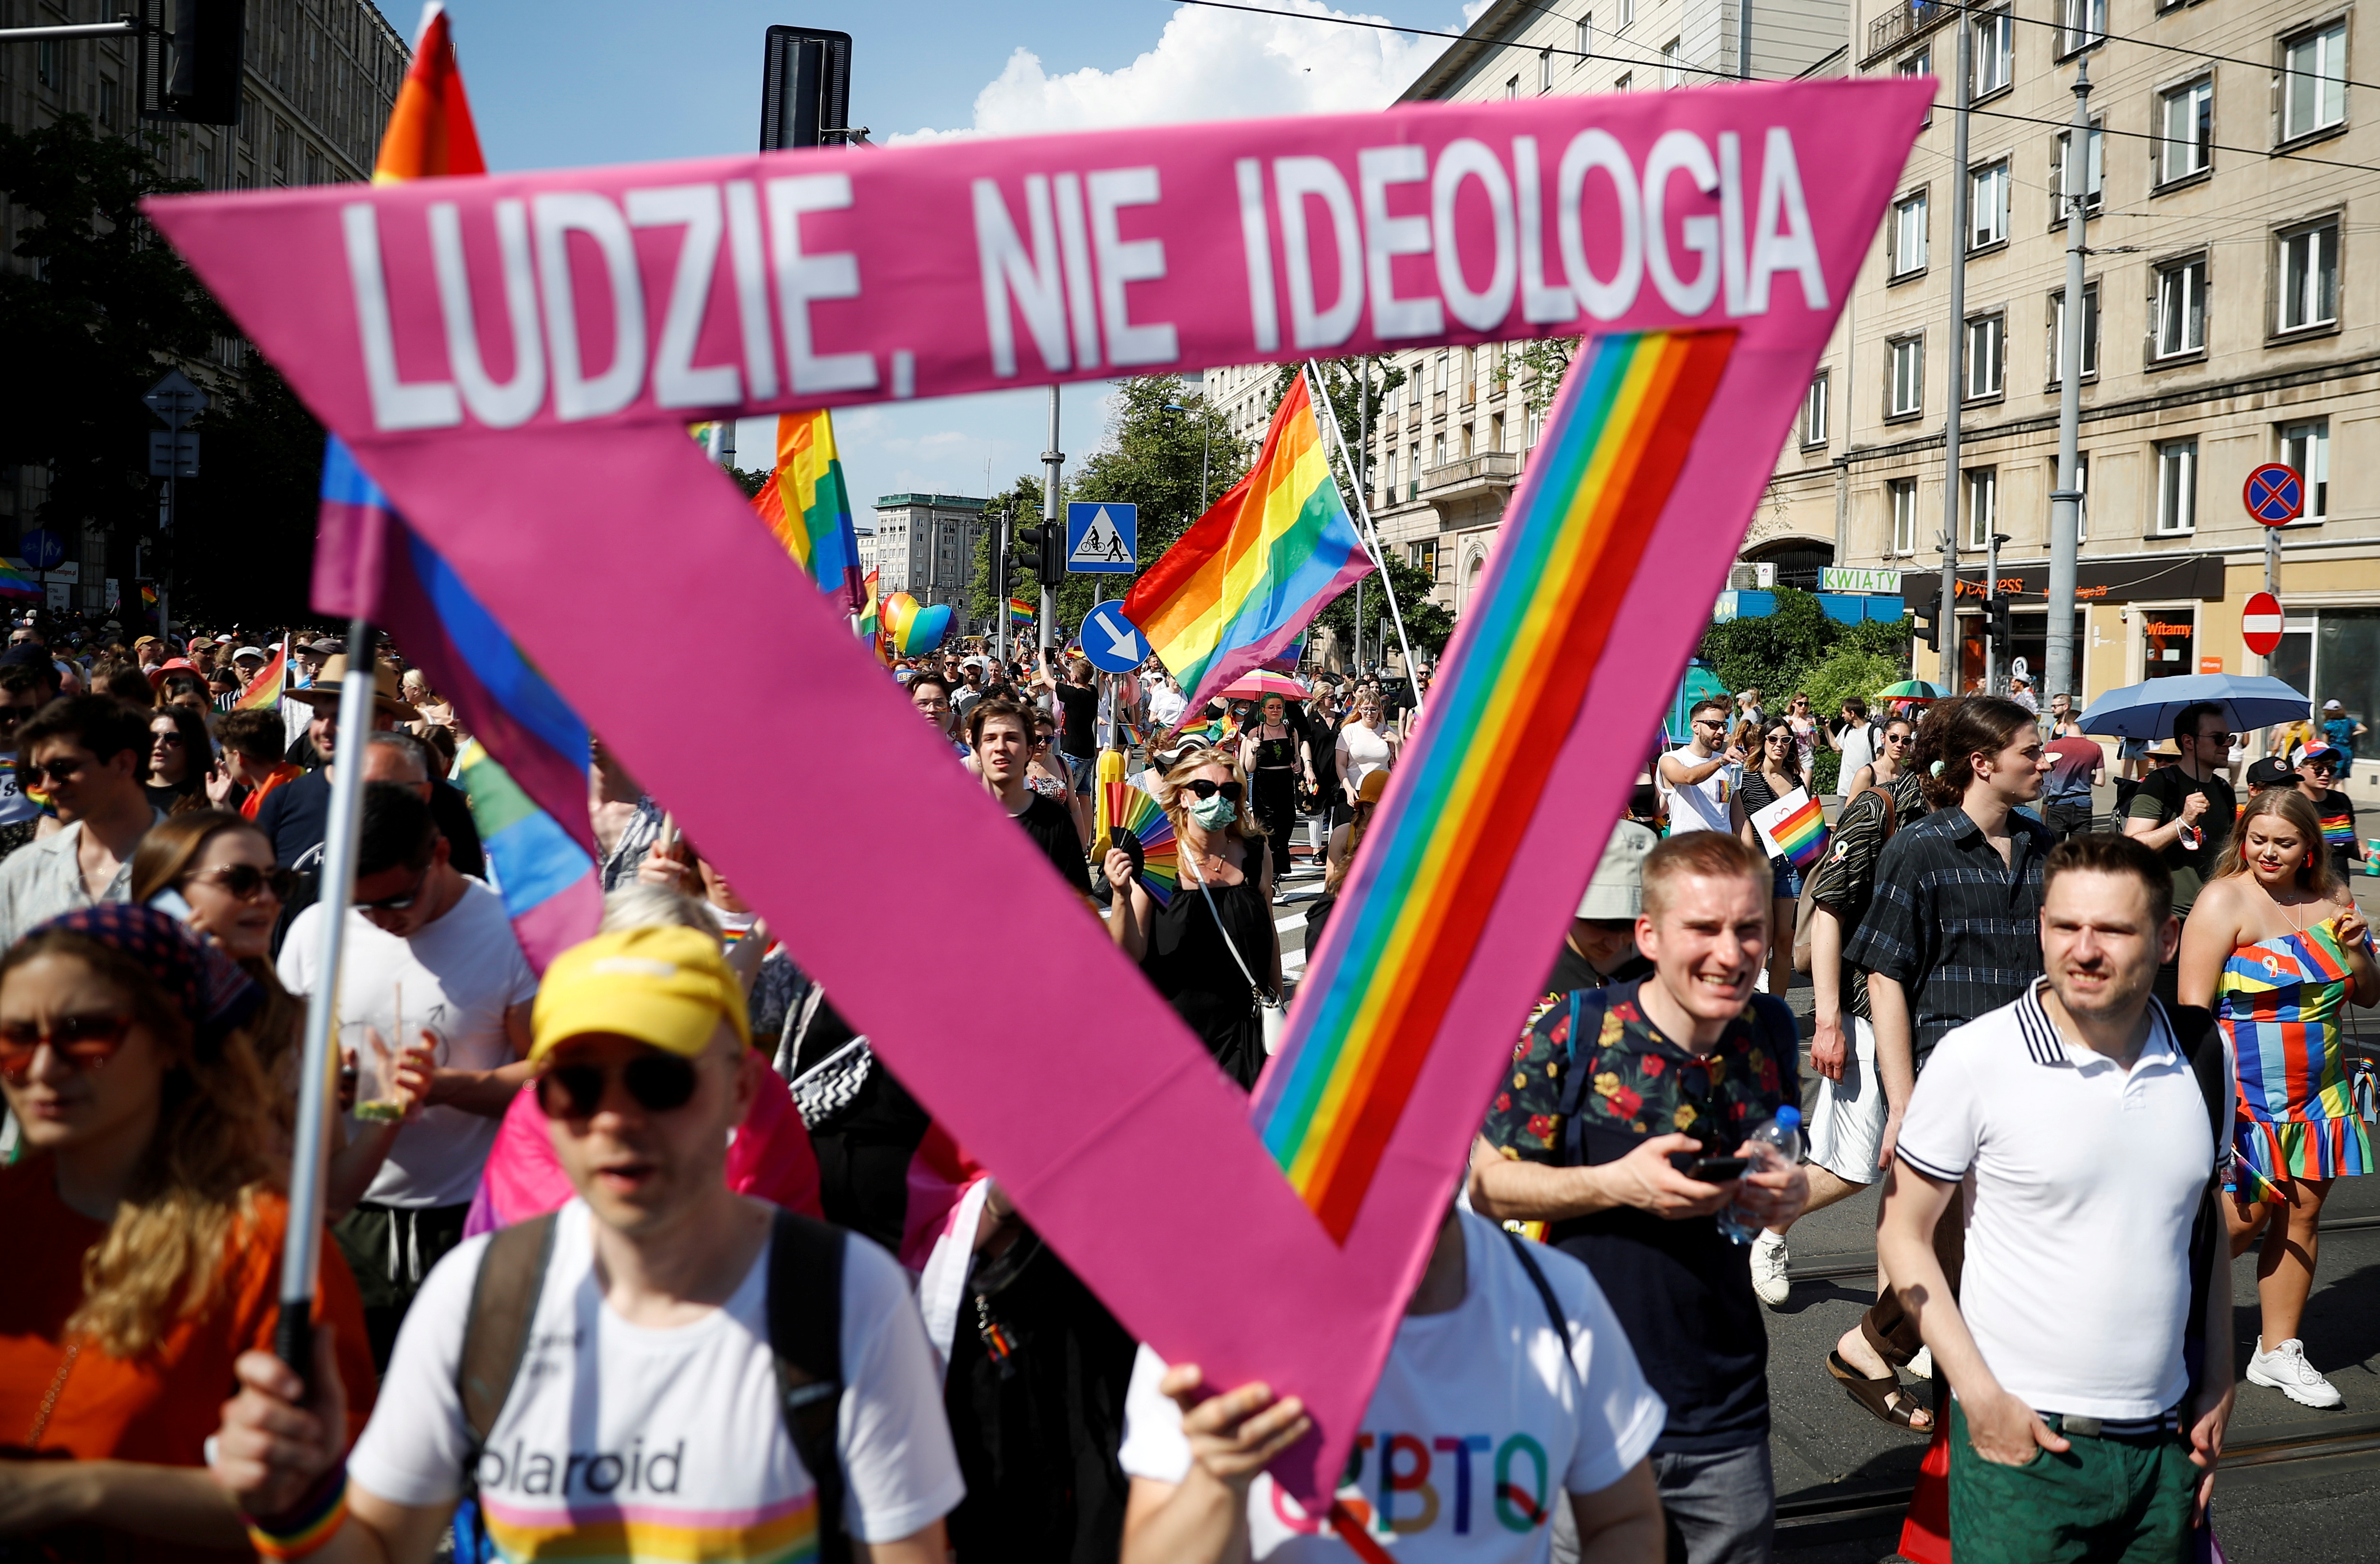 UK campaign targets Poland's 'LGBT-free zones' – DW – 04/21/2021